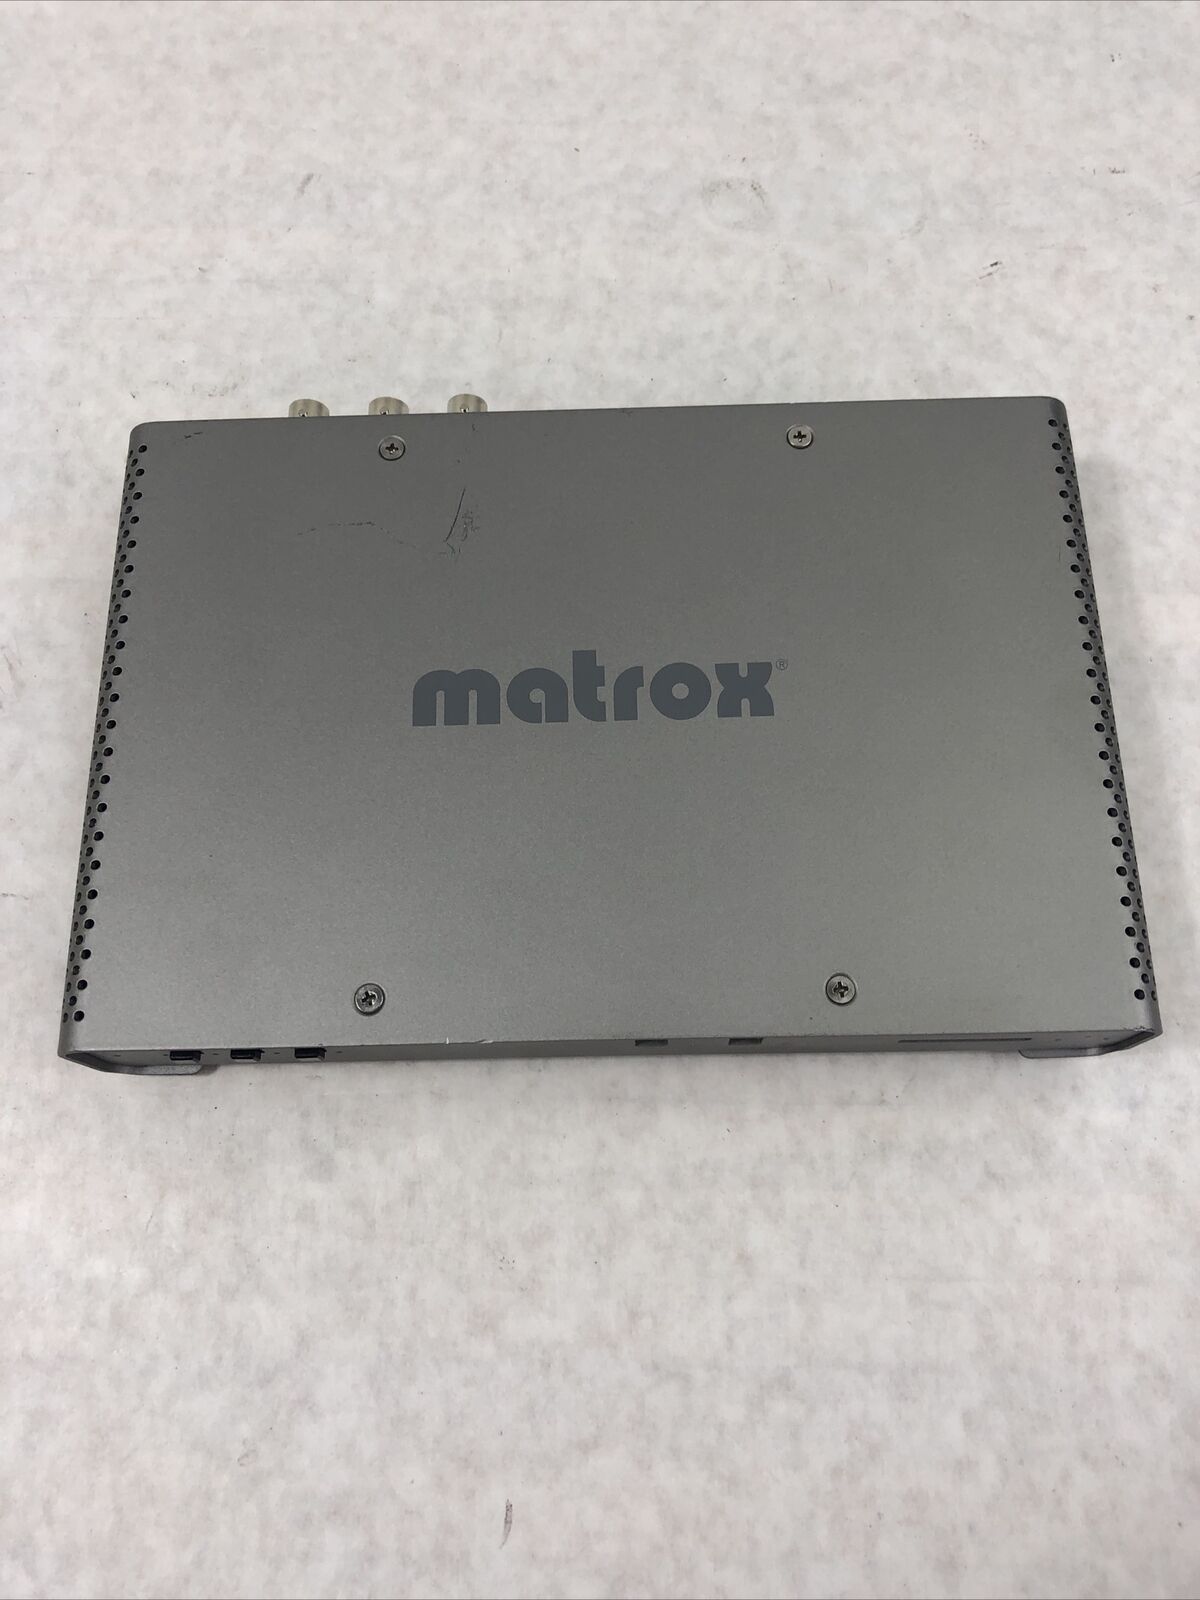 Matrox Monarch HDX MHDX/I Dual-Channel H.264 Video Encoder - No Power Adapter